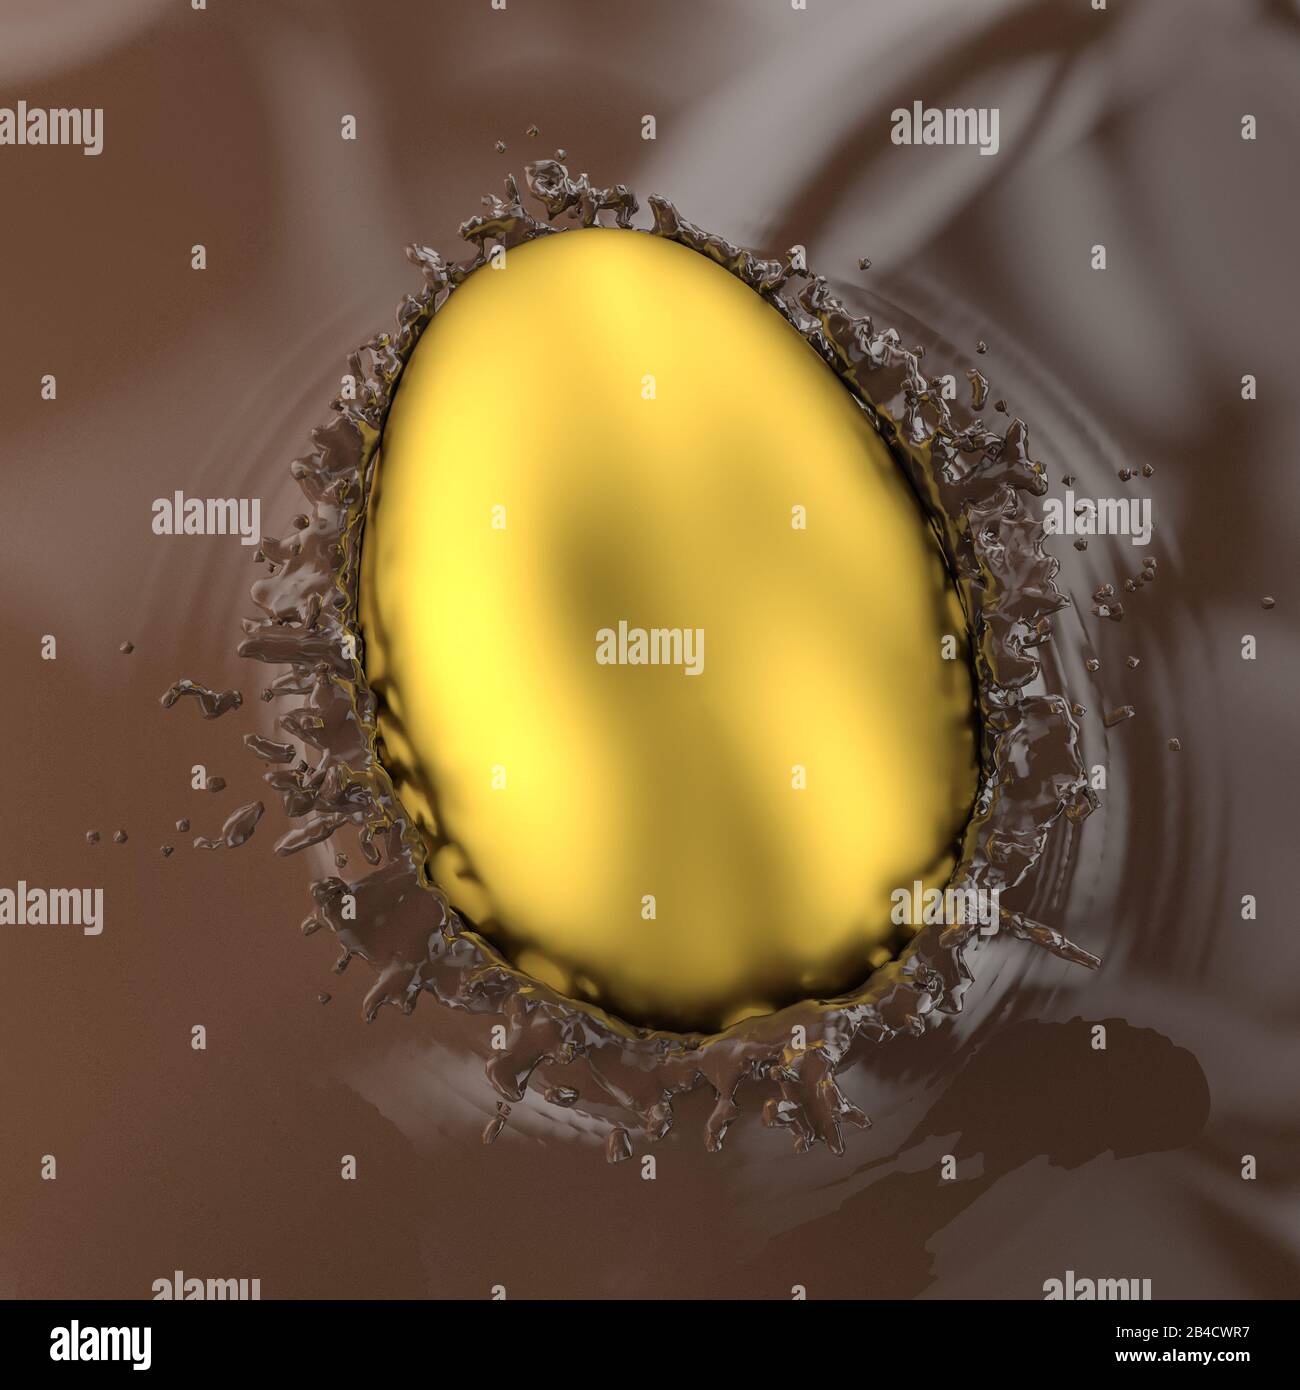 gold easter egg falling into chocolate creating splashes. nobody around. 3d render. food and sweets concept. Stock Photo